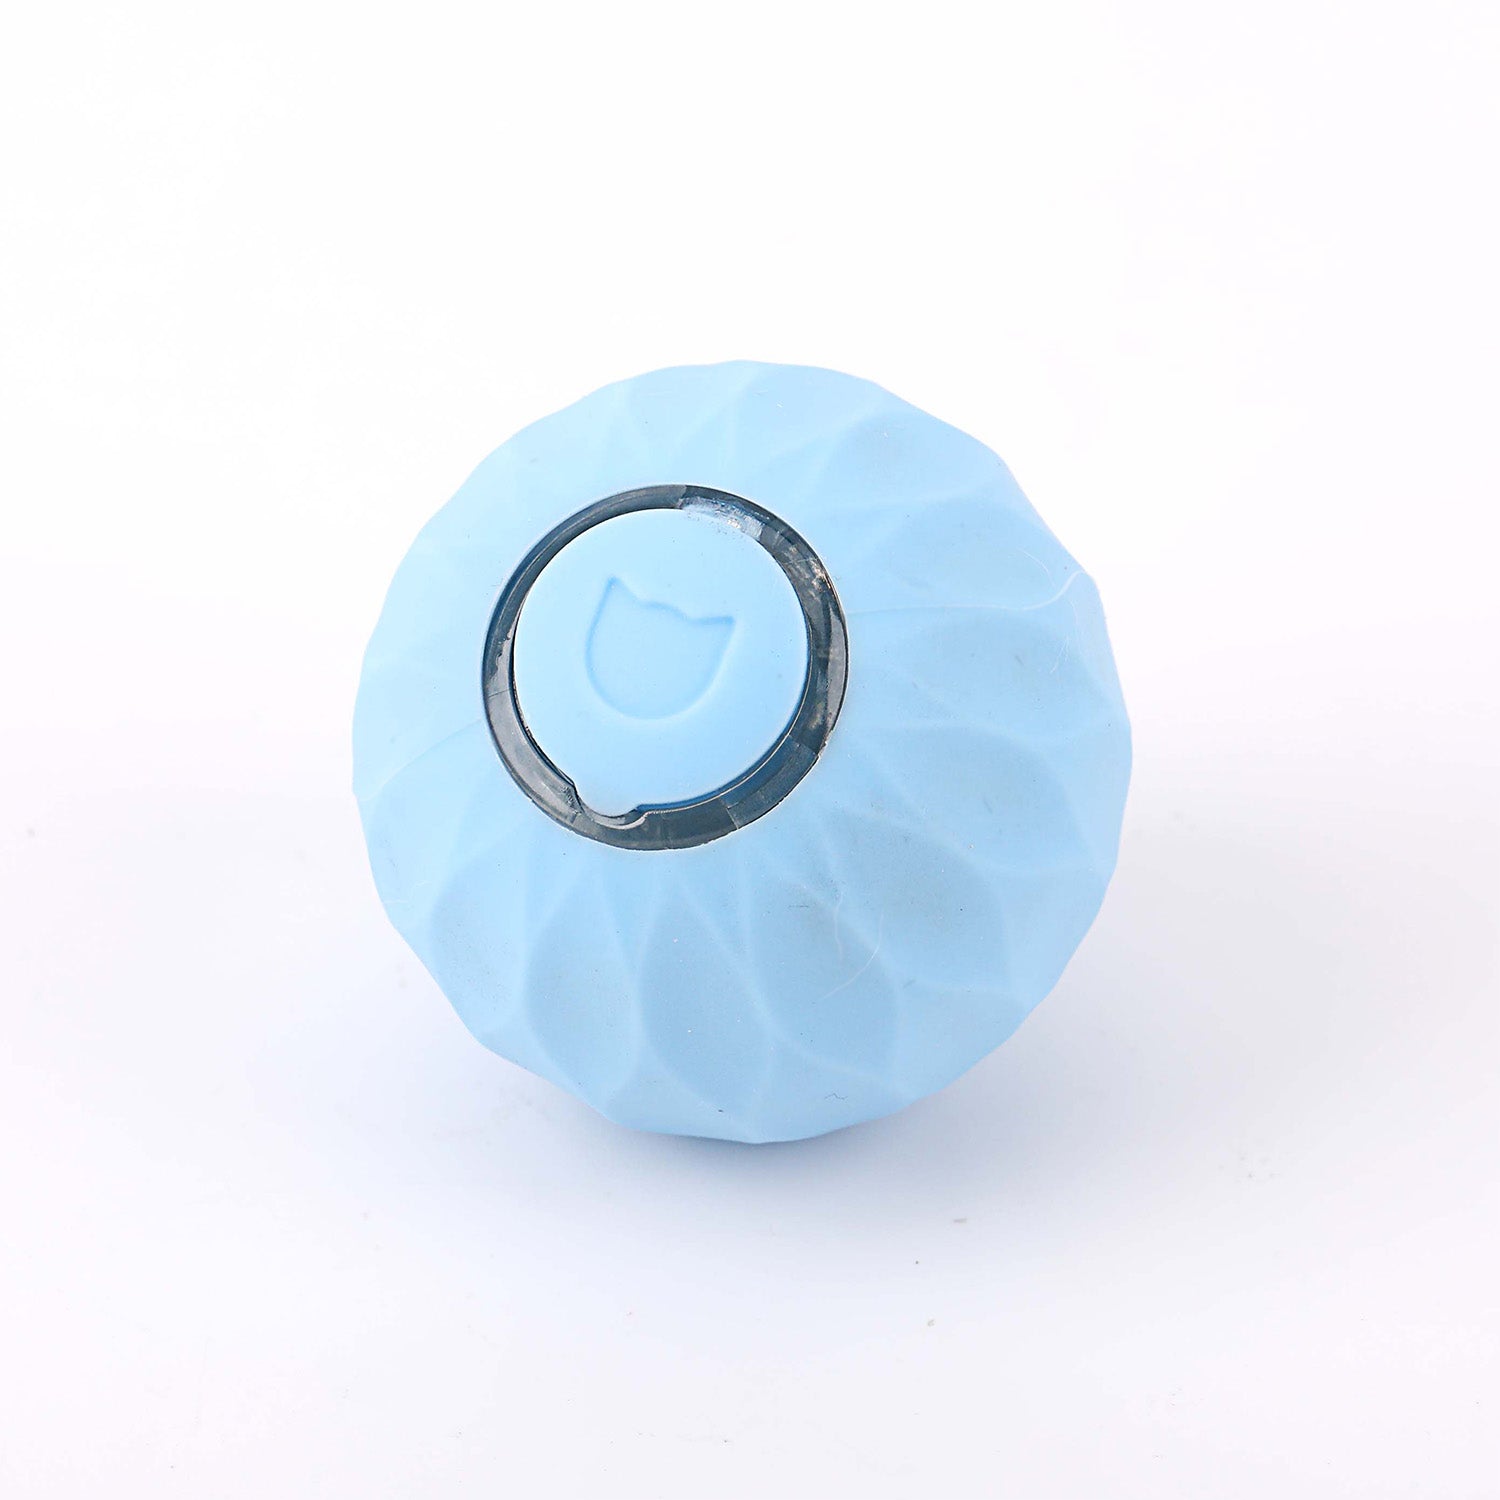 WLOOM Power Ball 2.0 - Touch Trigger on Vimeo